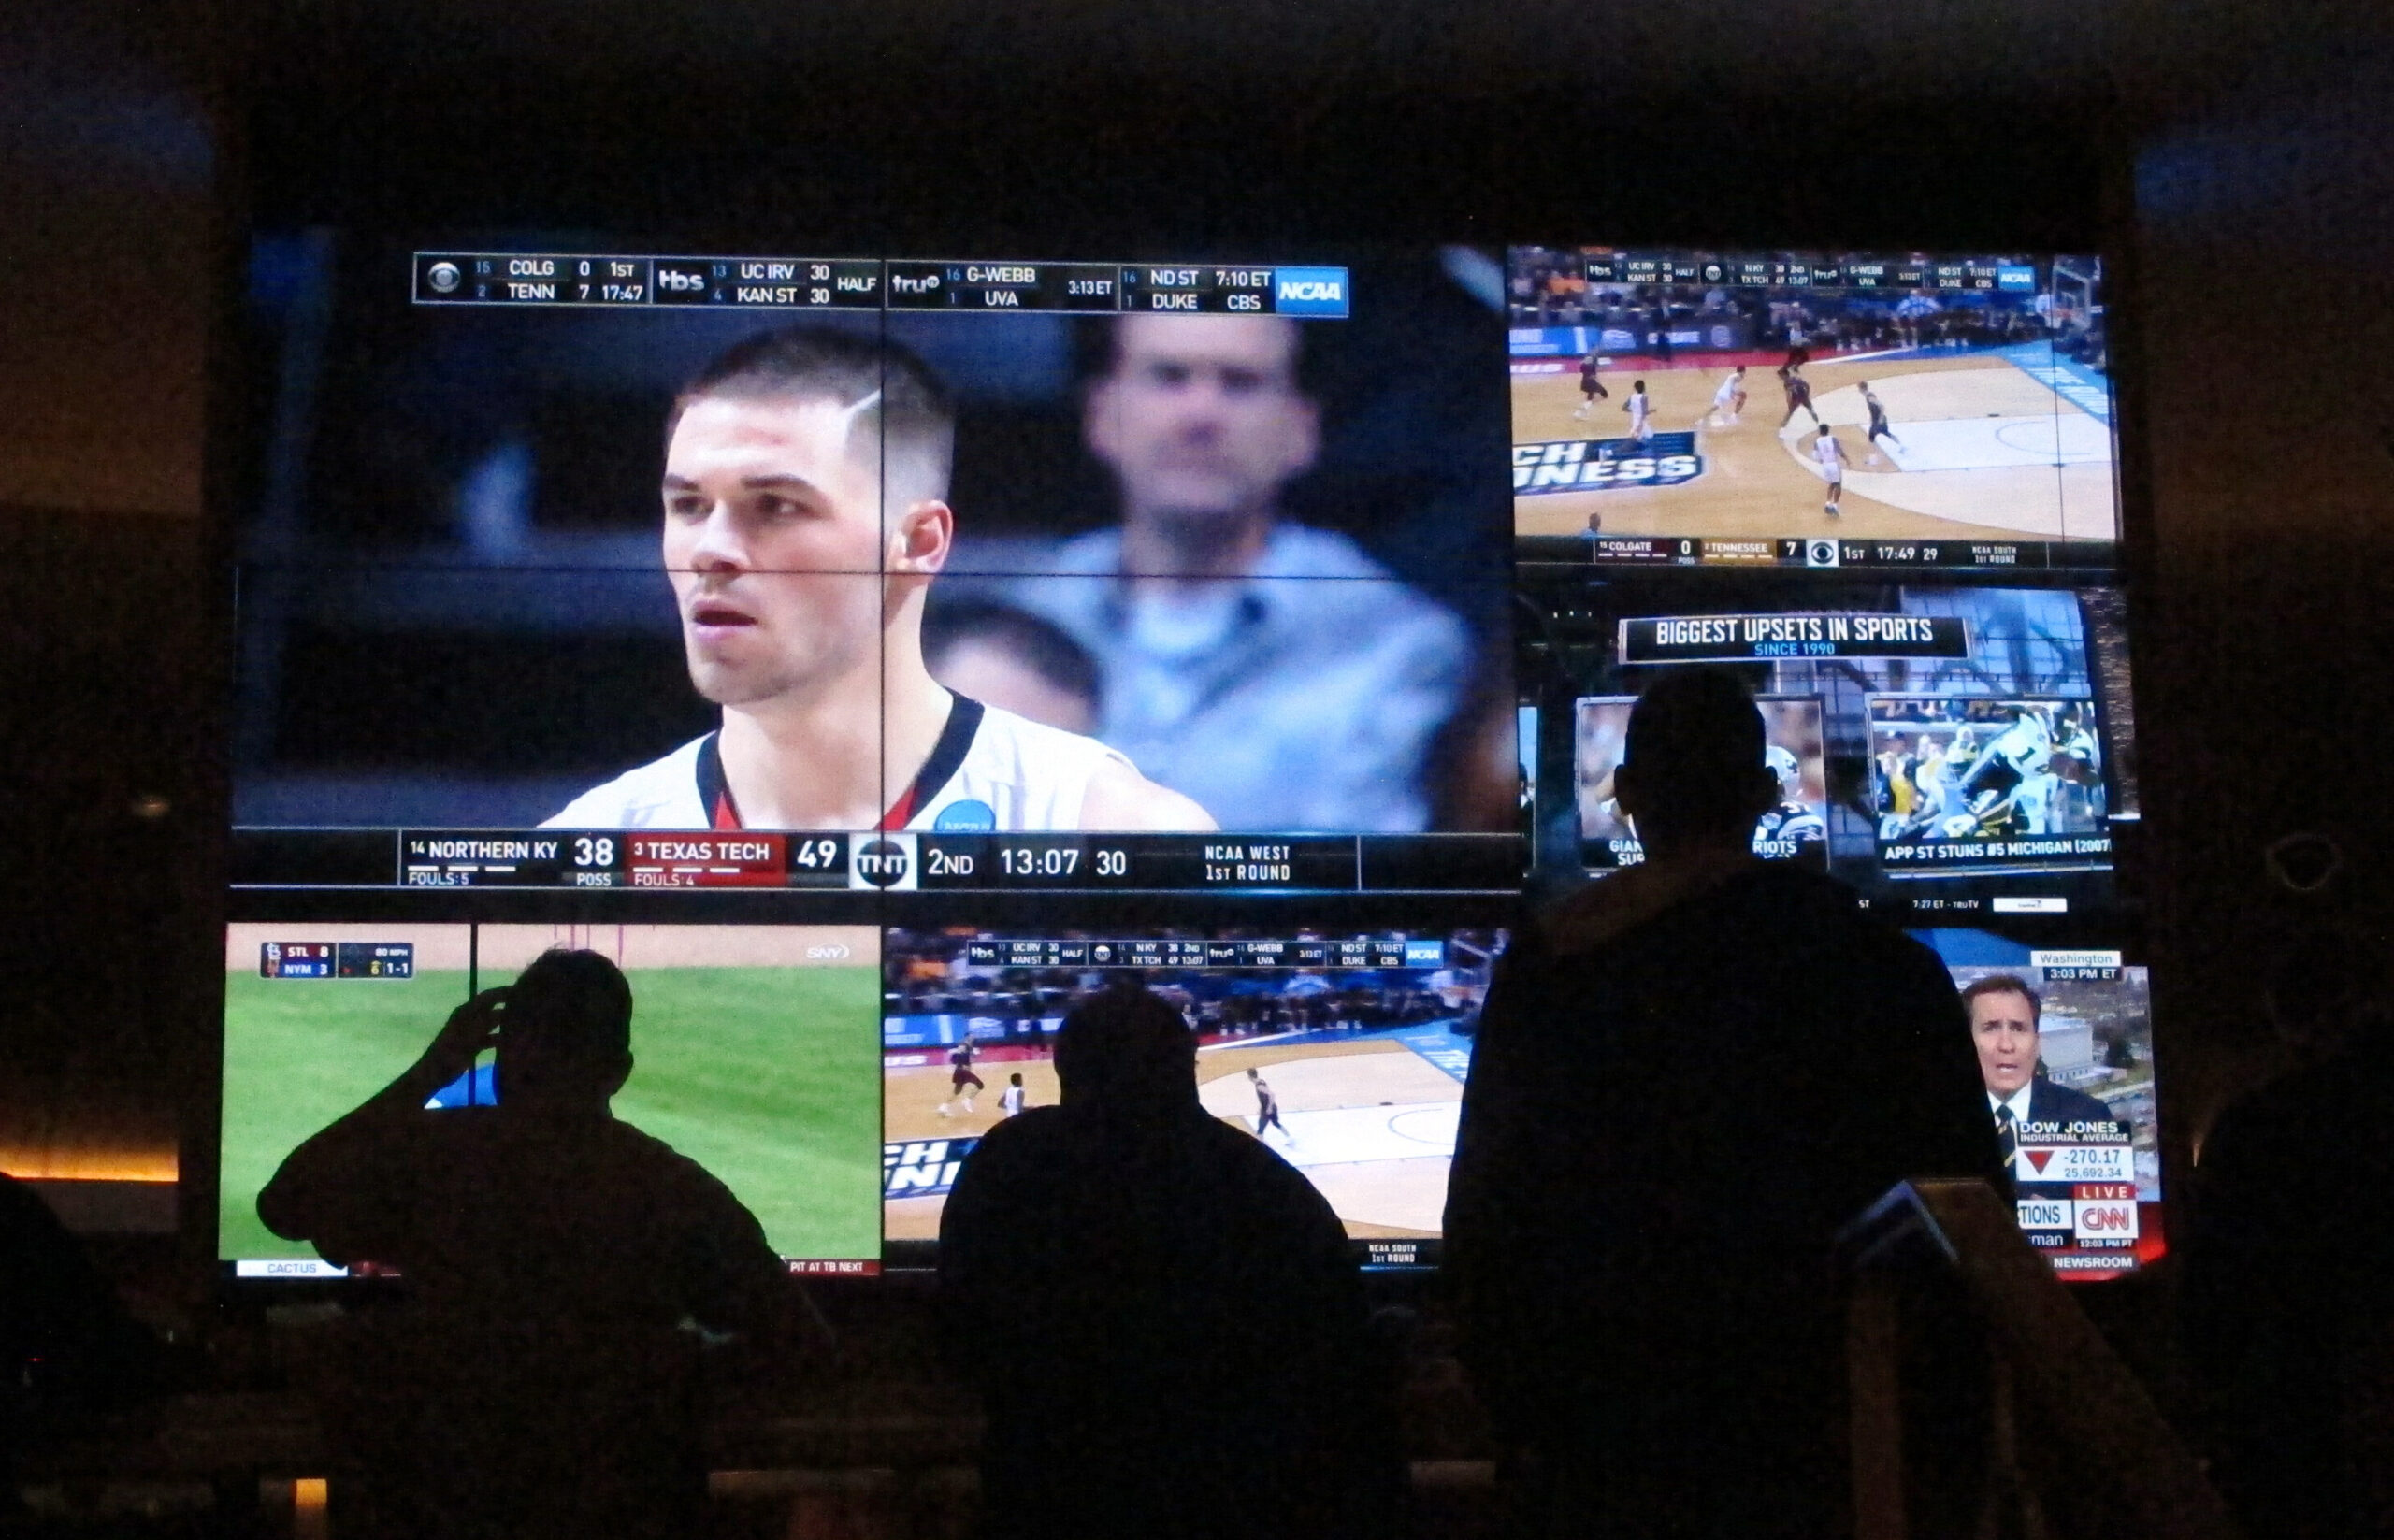 customers watch a game during the NCAA March Madness college basketball tournament